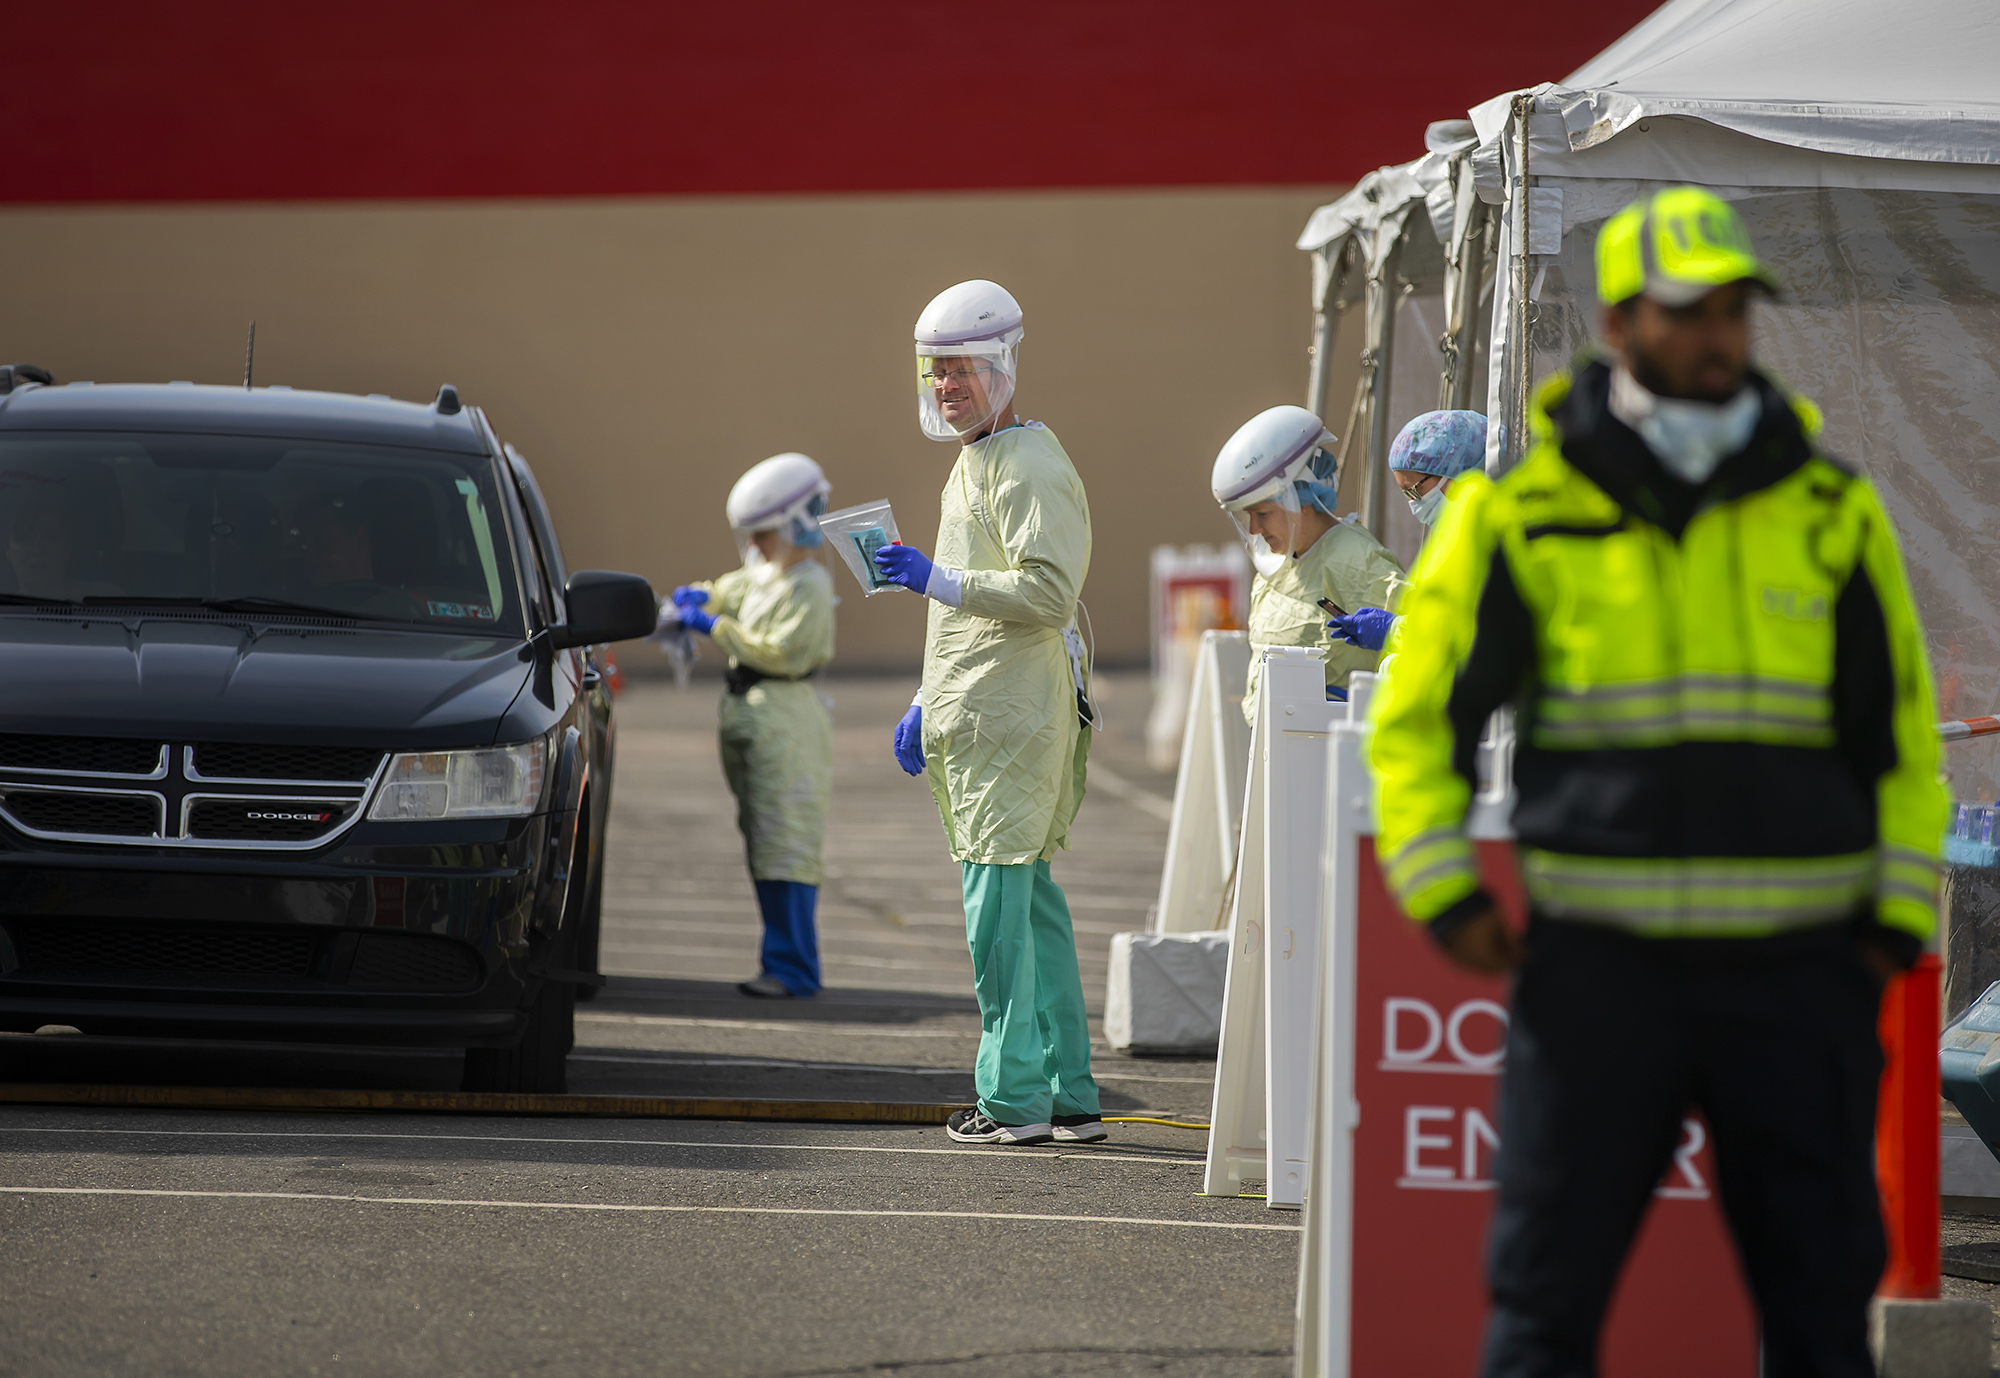 A car in line at drive through testing at the COVID-19 pop up testing site, with four medical personnel outside car in full protective gear and a security guard wearing a medical mask standing at the entrance